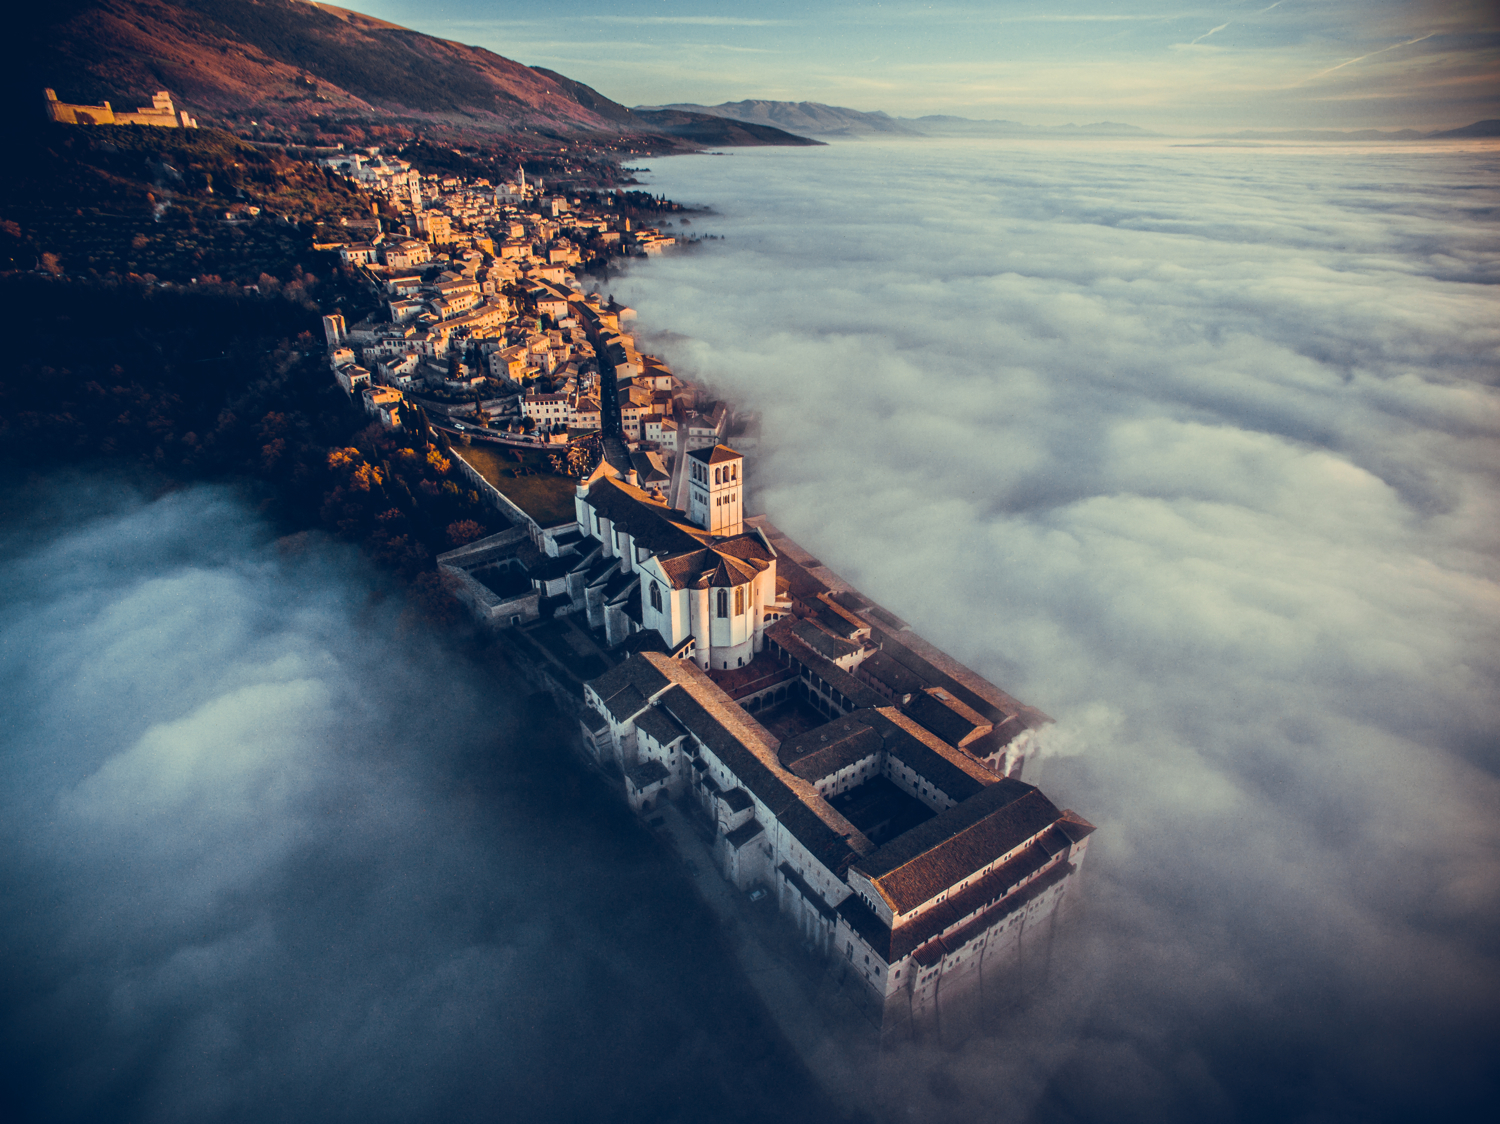 dronestagram 2016 contest 1st prize winner category travel basilica of saint francis assisi